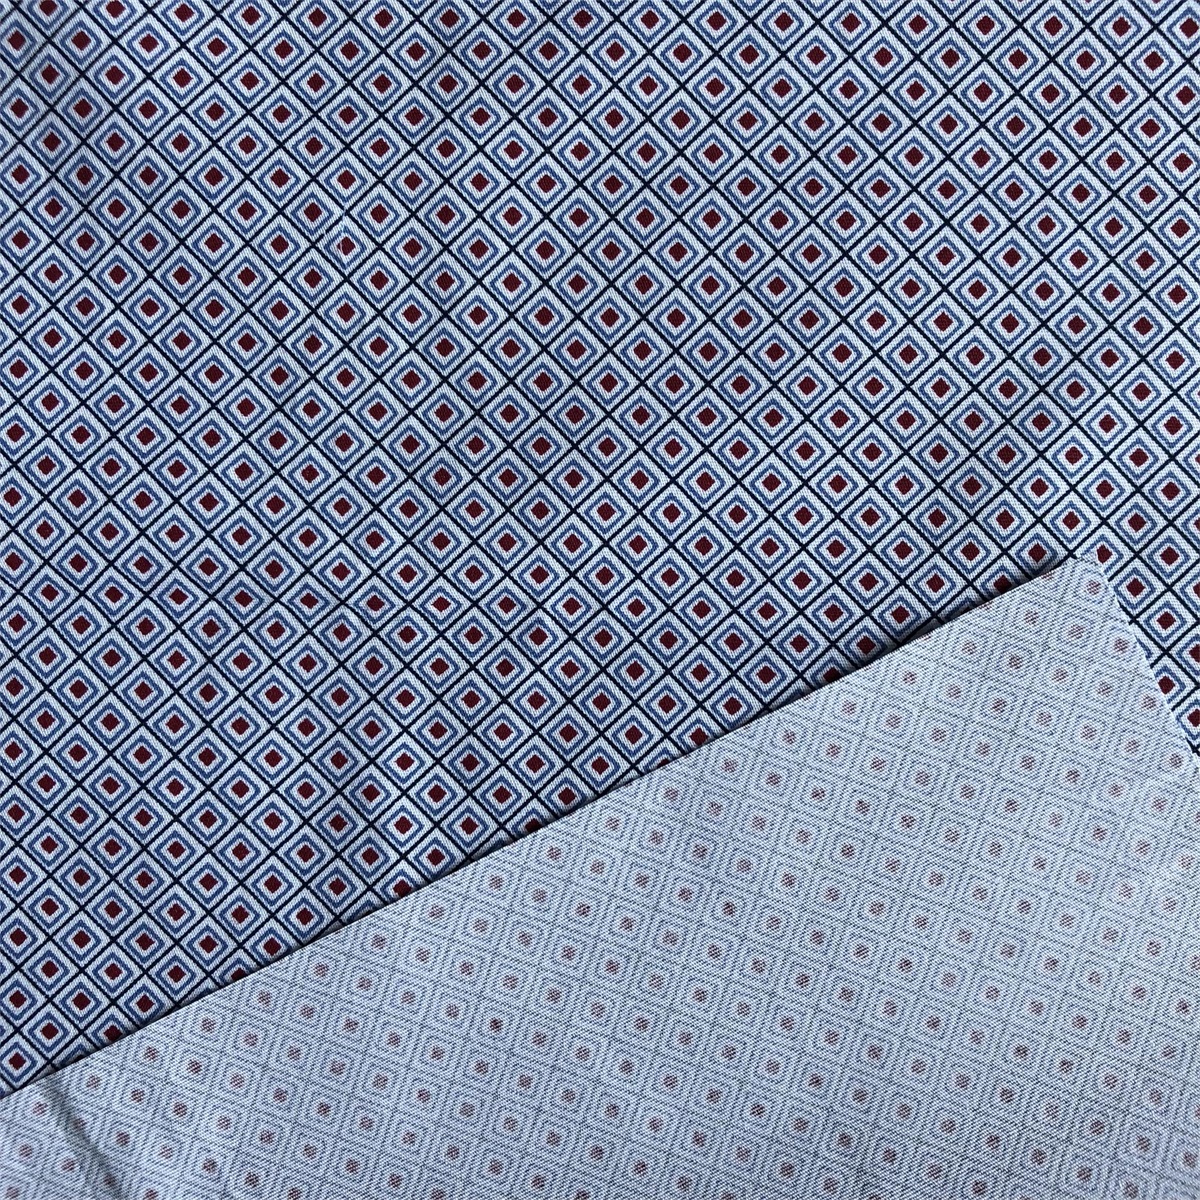 New Cotton Spandex Fabric by compact yarn for men's casual shirts 98% cotton 2% spandex poplin printed shirts woven elasthane fabric